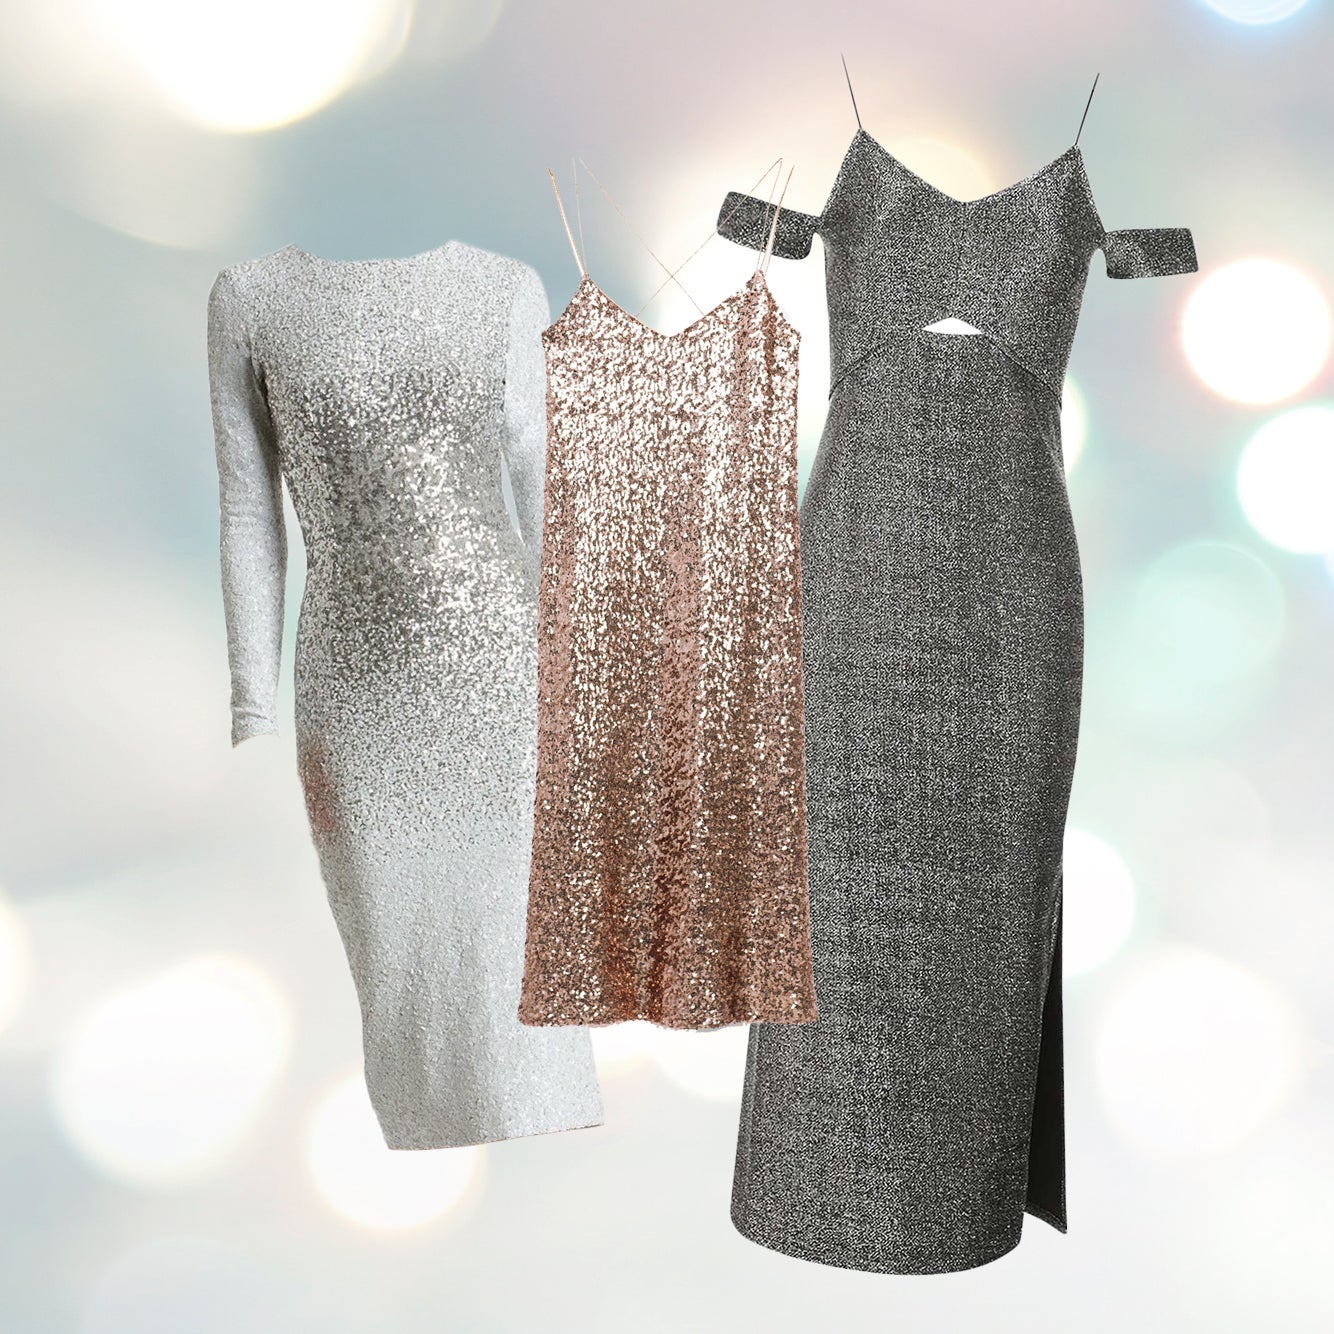 The Sequin Dress That Will Shut Down That Holiday Party